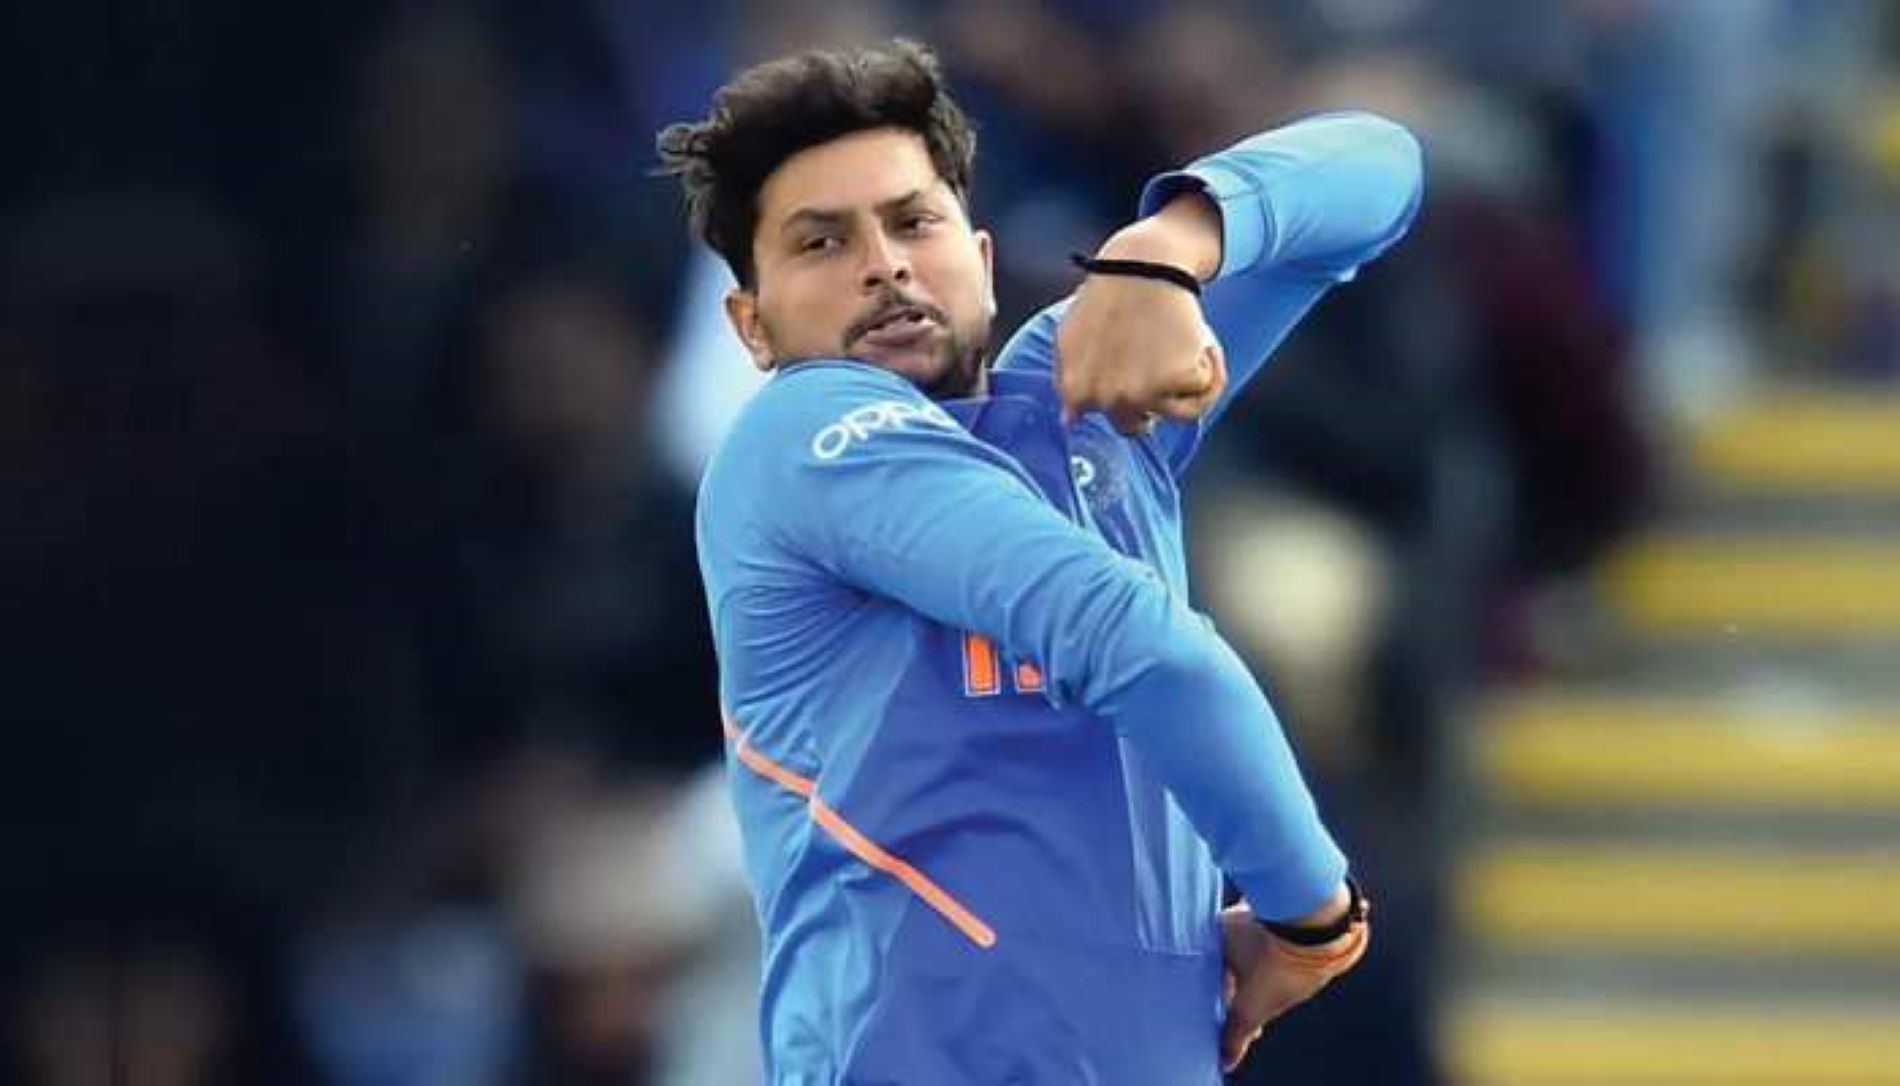 Kuldeep Yadav has bamboozled many a batter with his bowling action over the past year.